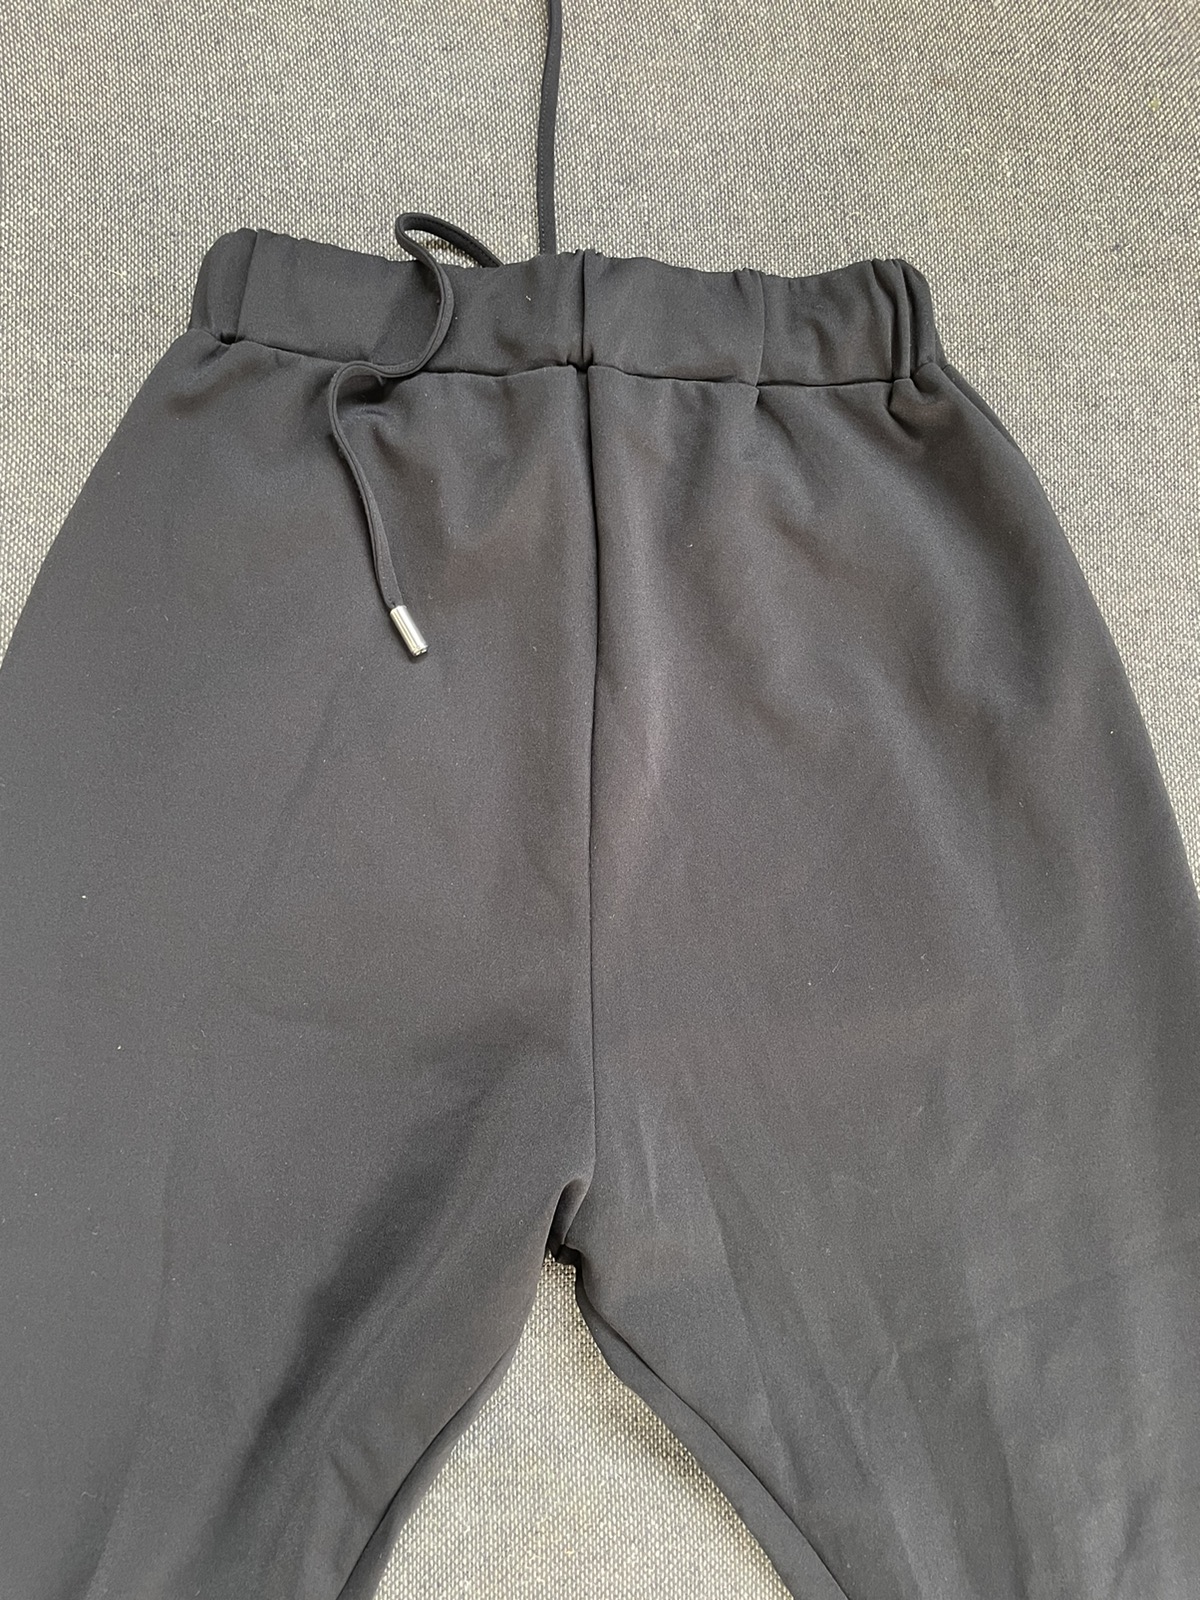 DSQUARED2 Sweatpants Like New Condition Made In Italy - 8